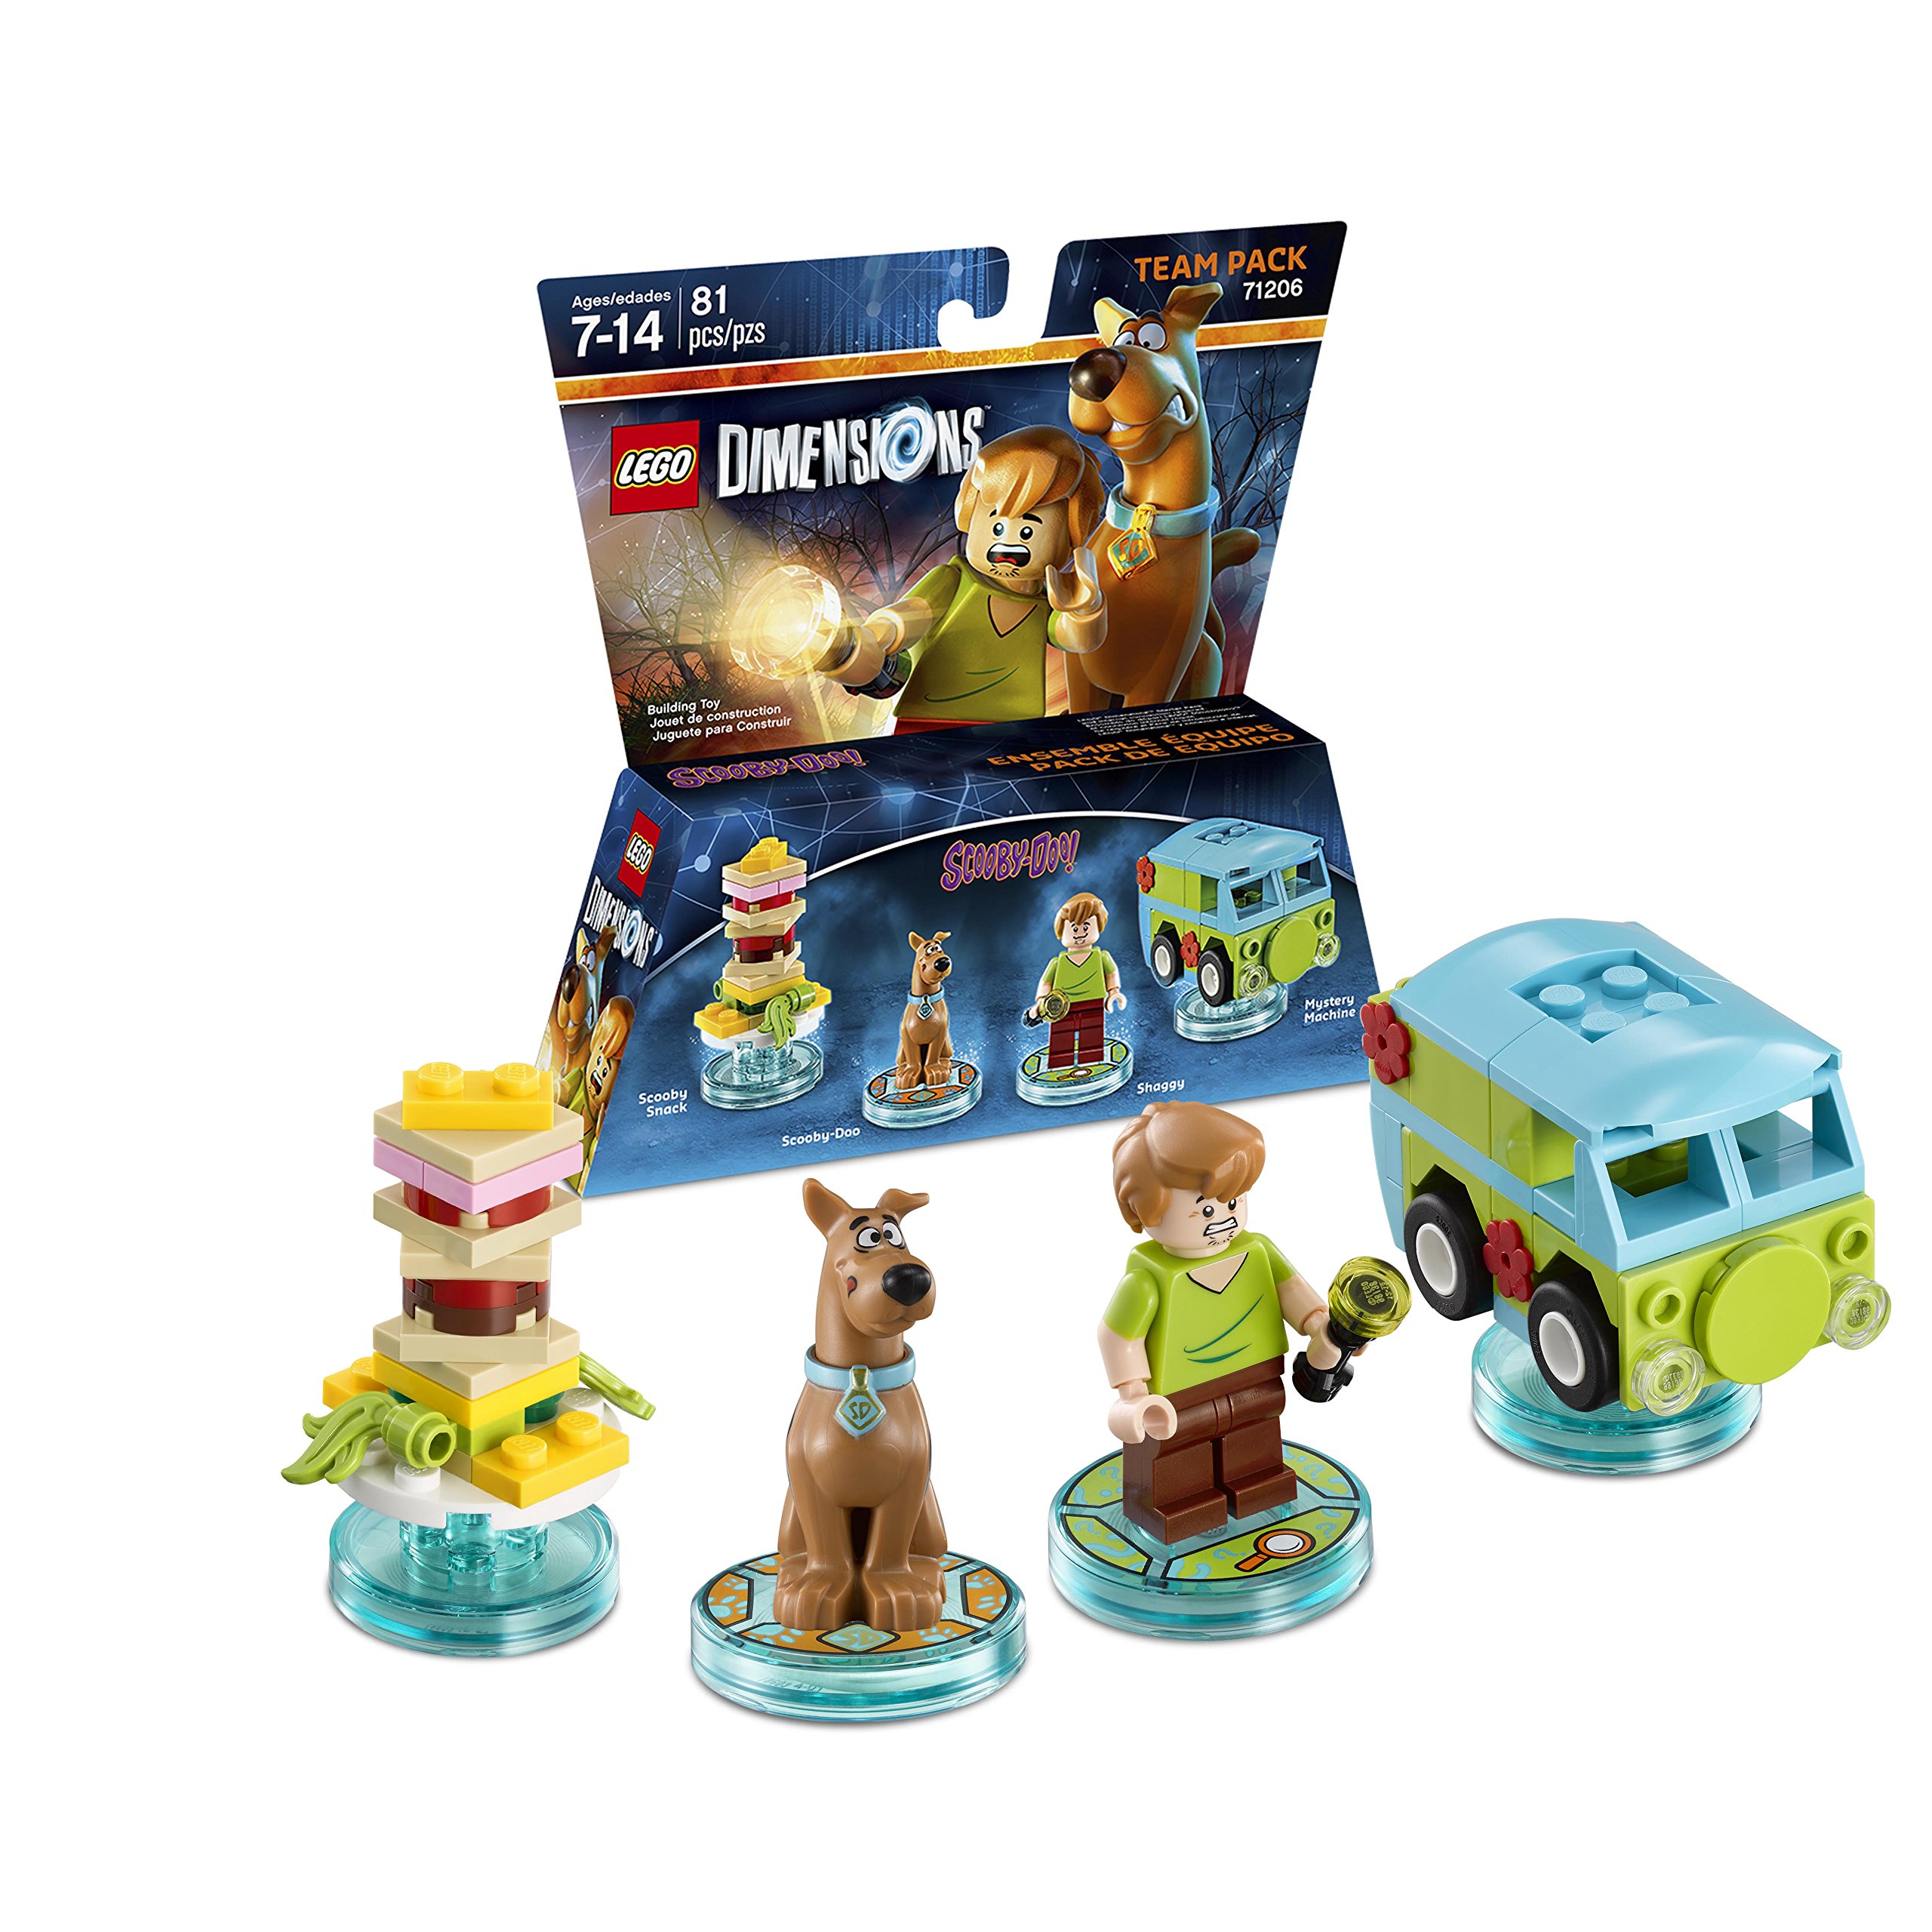 LEGO Dimensions Scooby Doo (Scooby Doo) Team Pack (Universal) - image 1 of 4